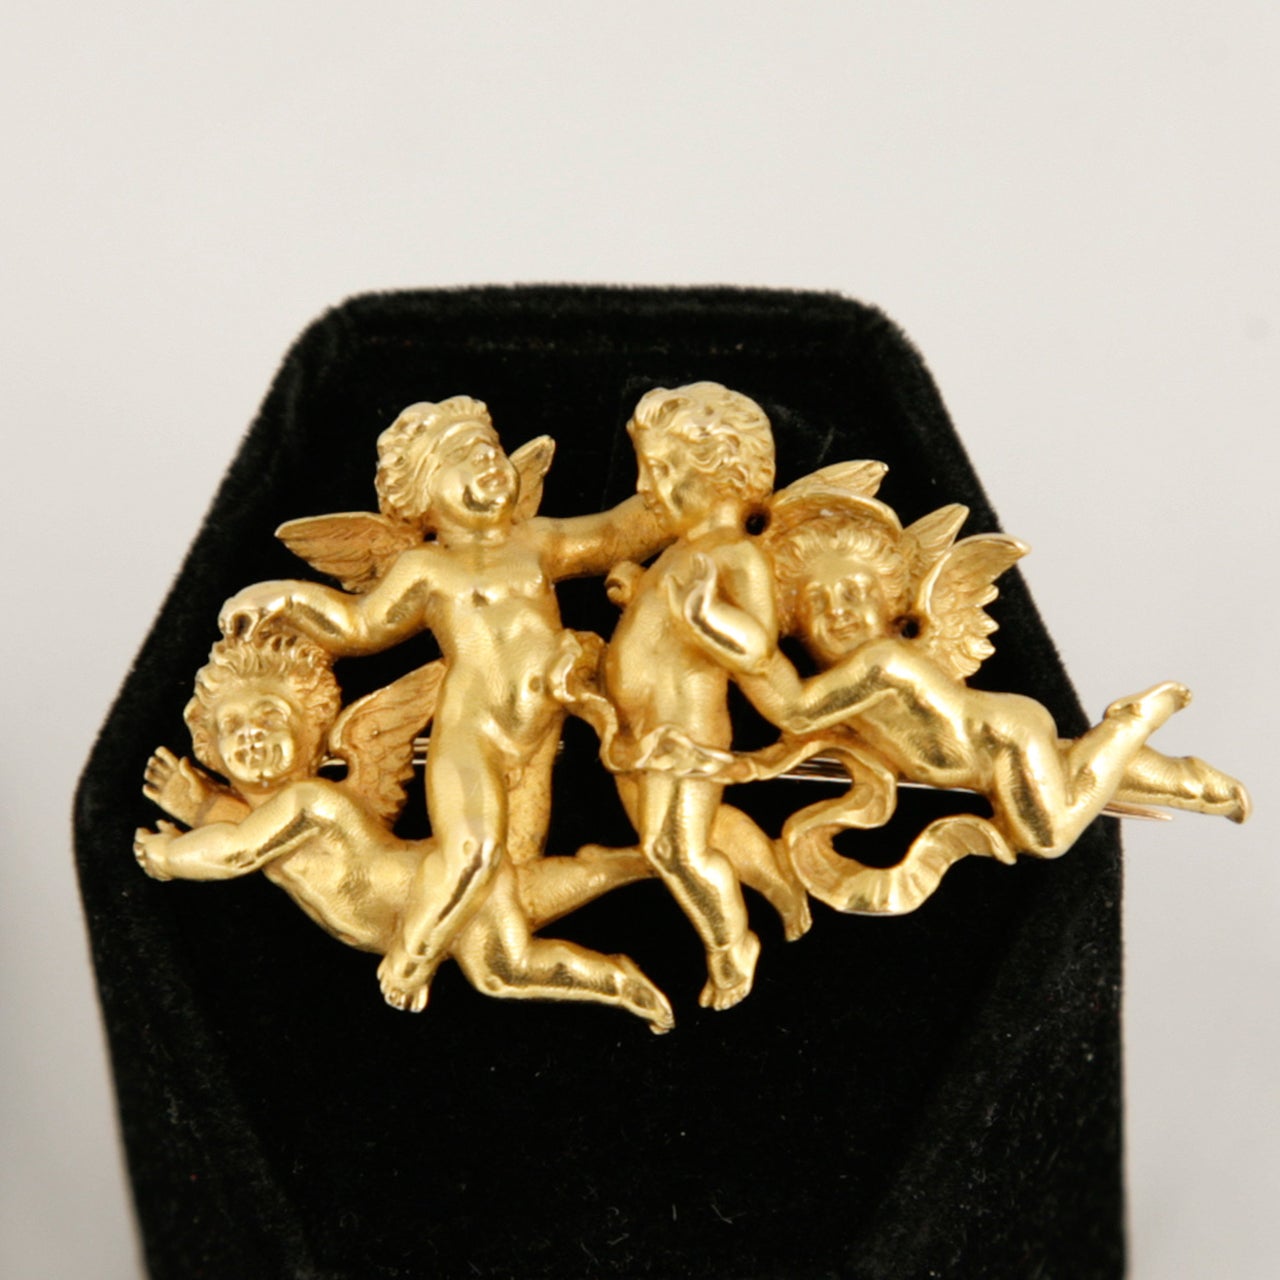 Group of Cherubs in 18 KT Gold . French control marks